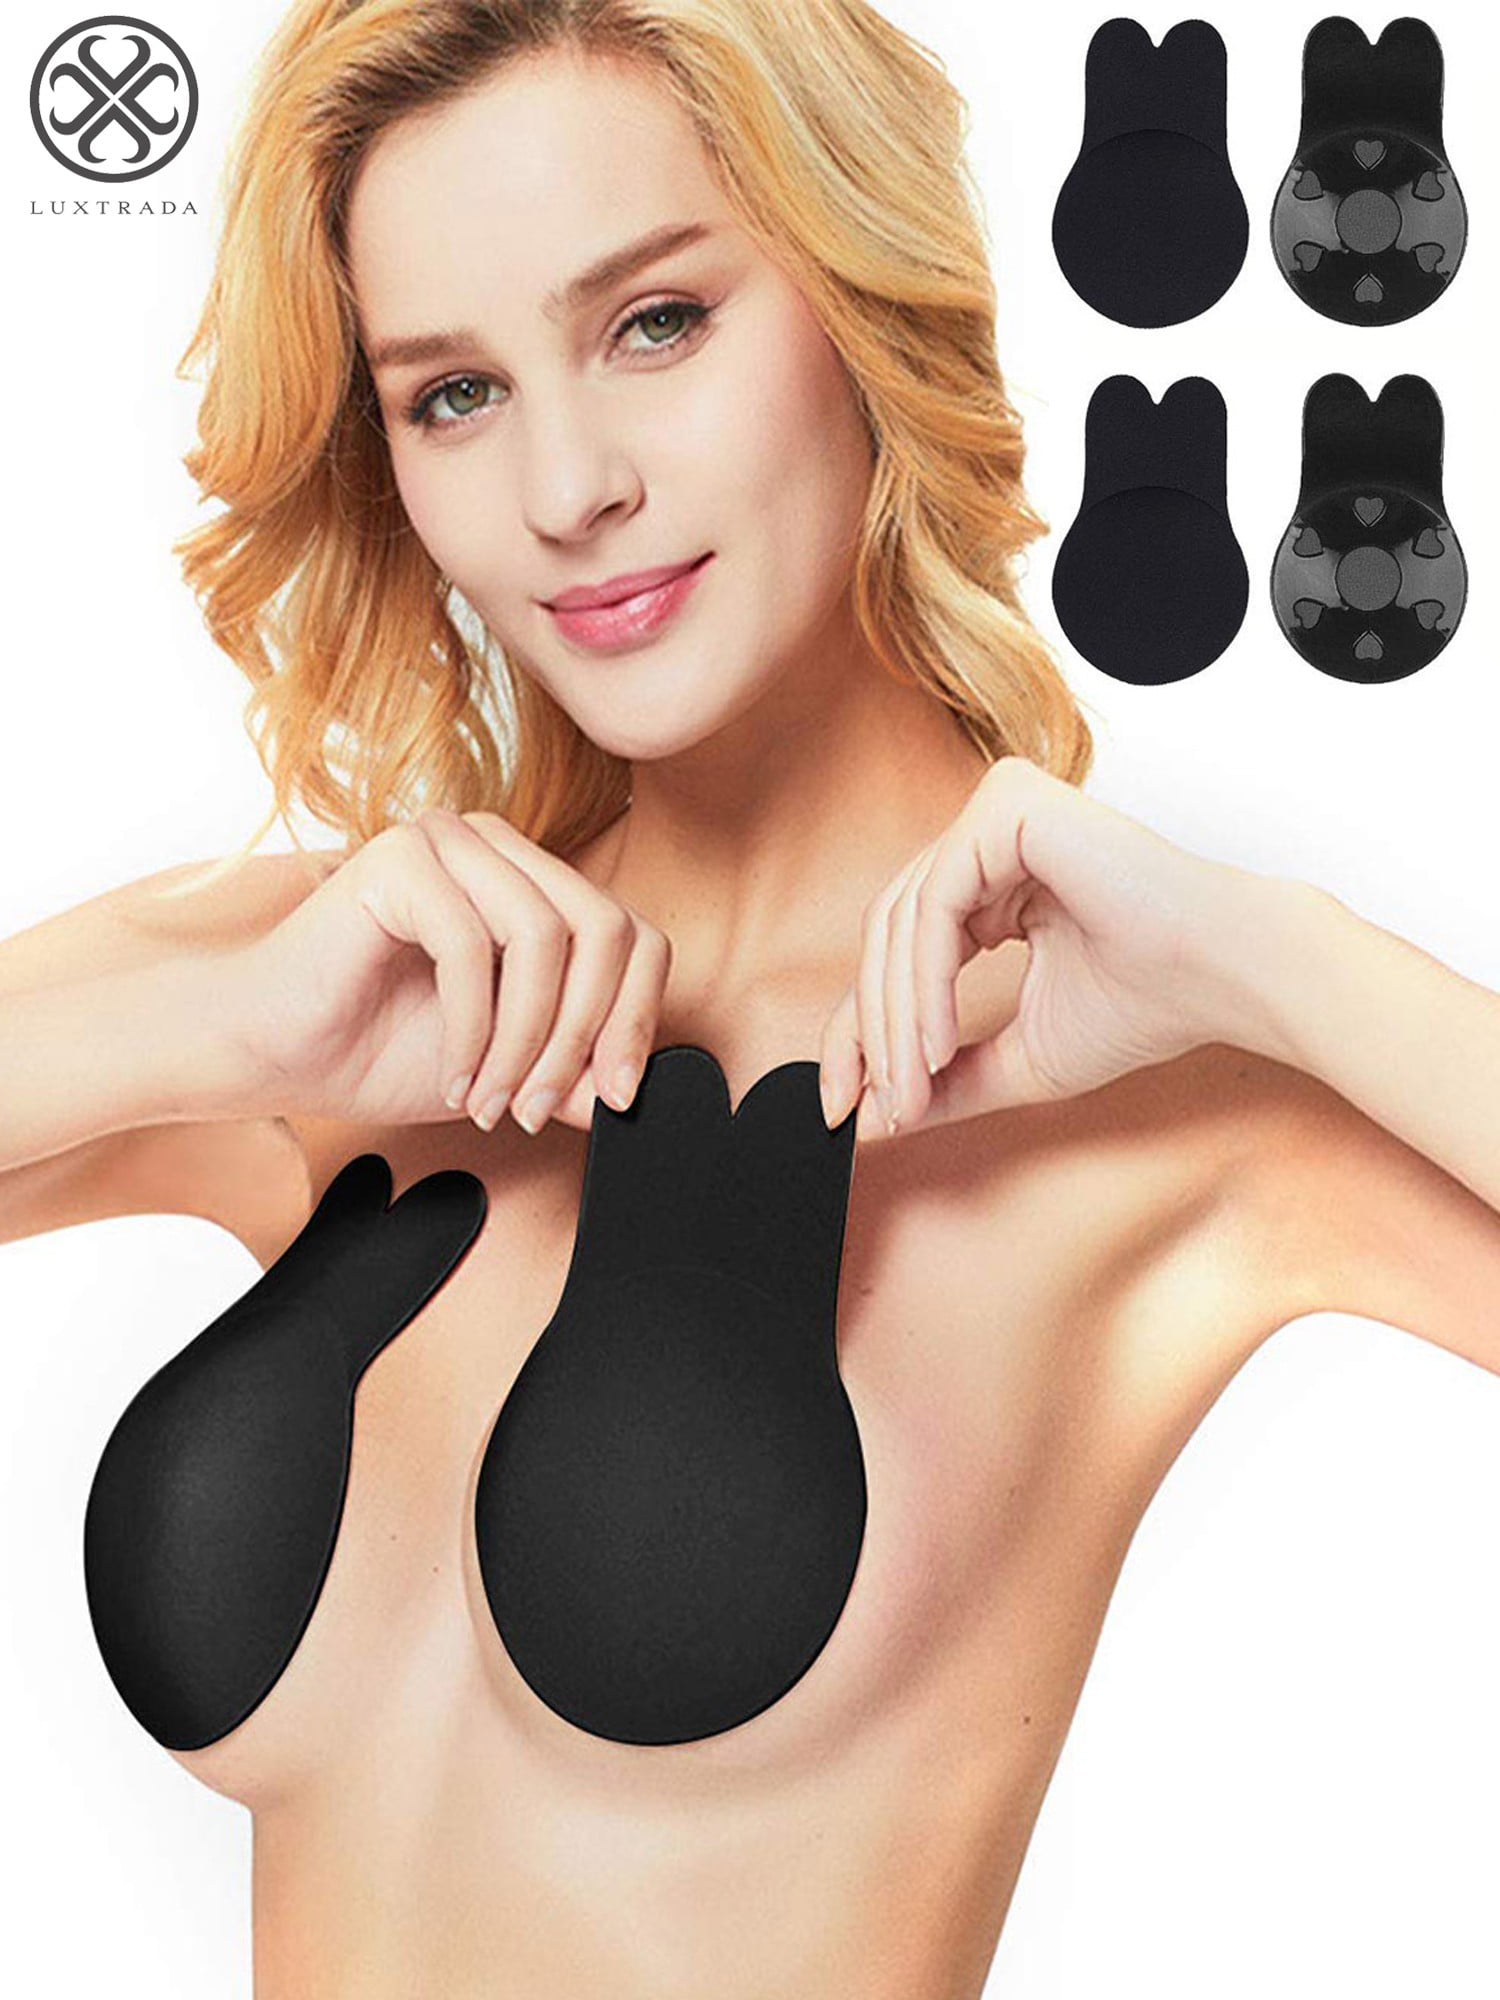 lalawing Strapless Bra Rabbit Ears Lift Invisible Pastie Adhesive Breast Petals Reusable Easy to Clean